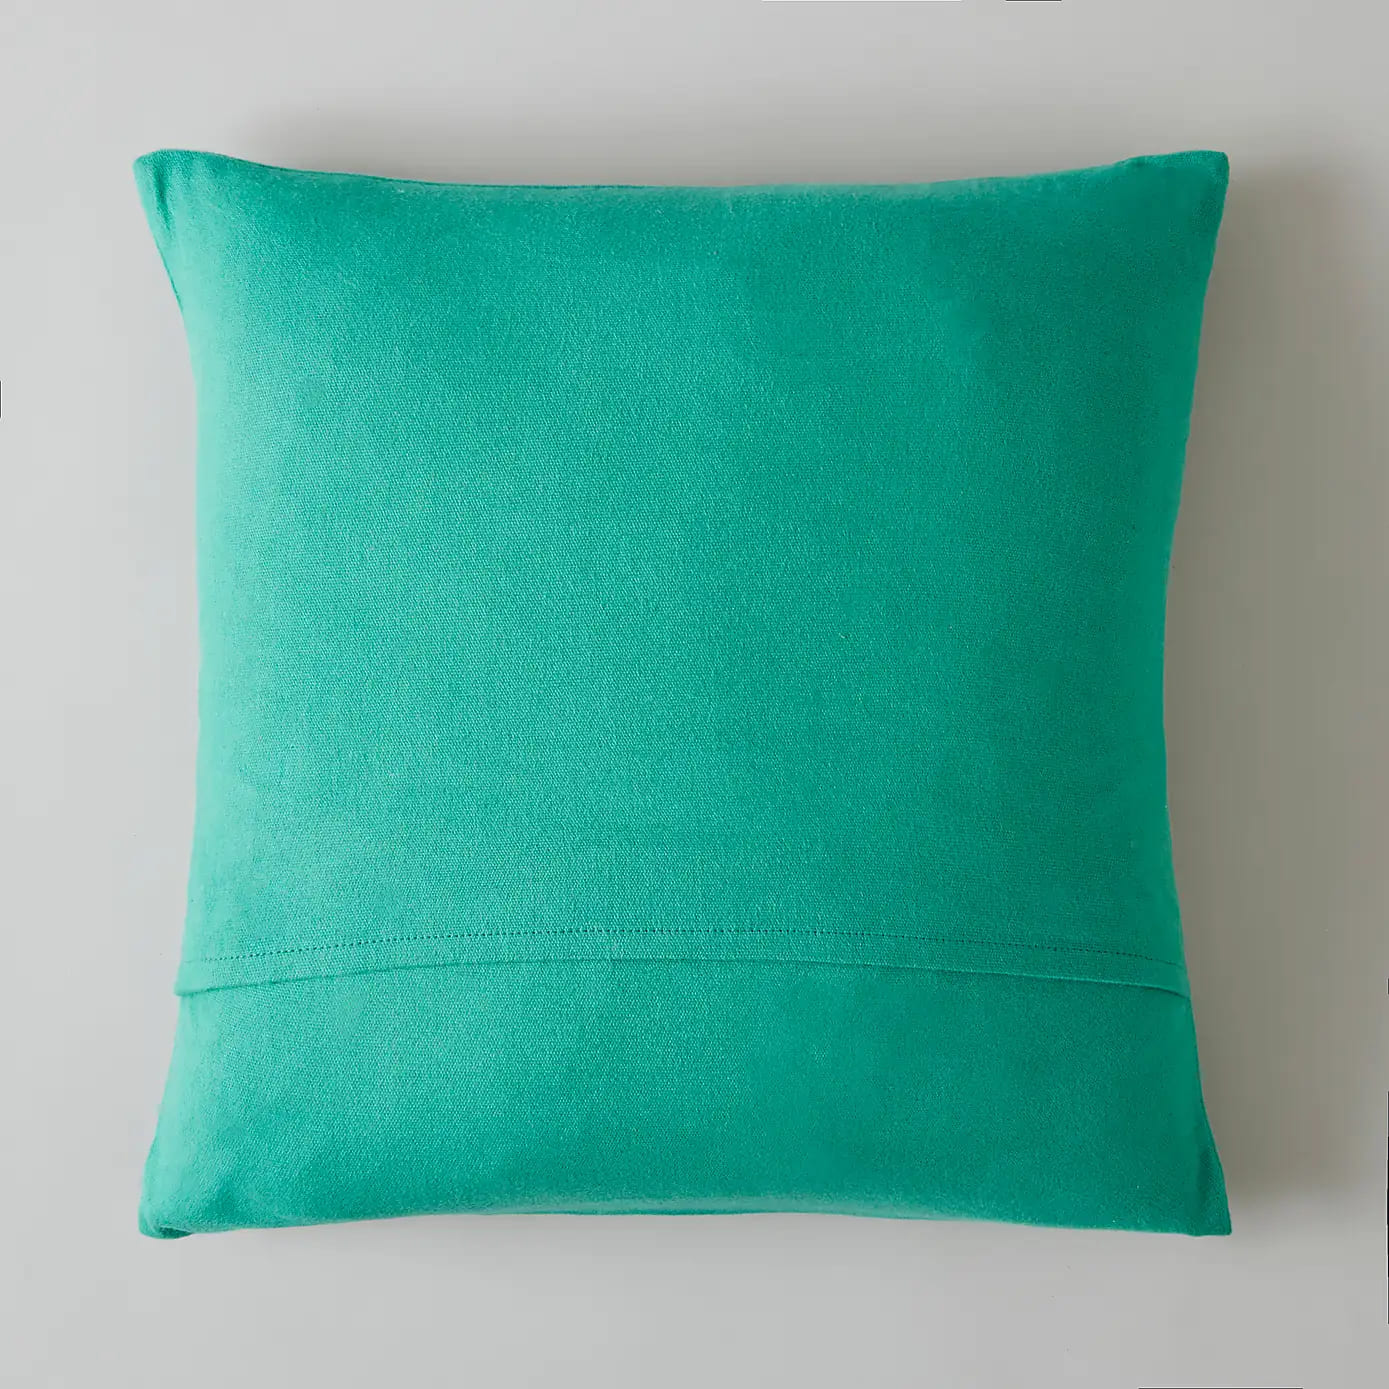 100% Recycled Printed Cushion